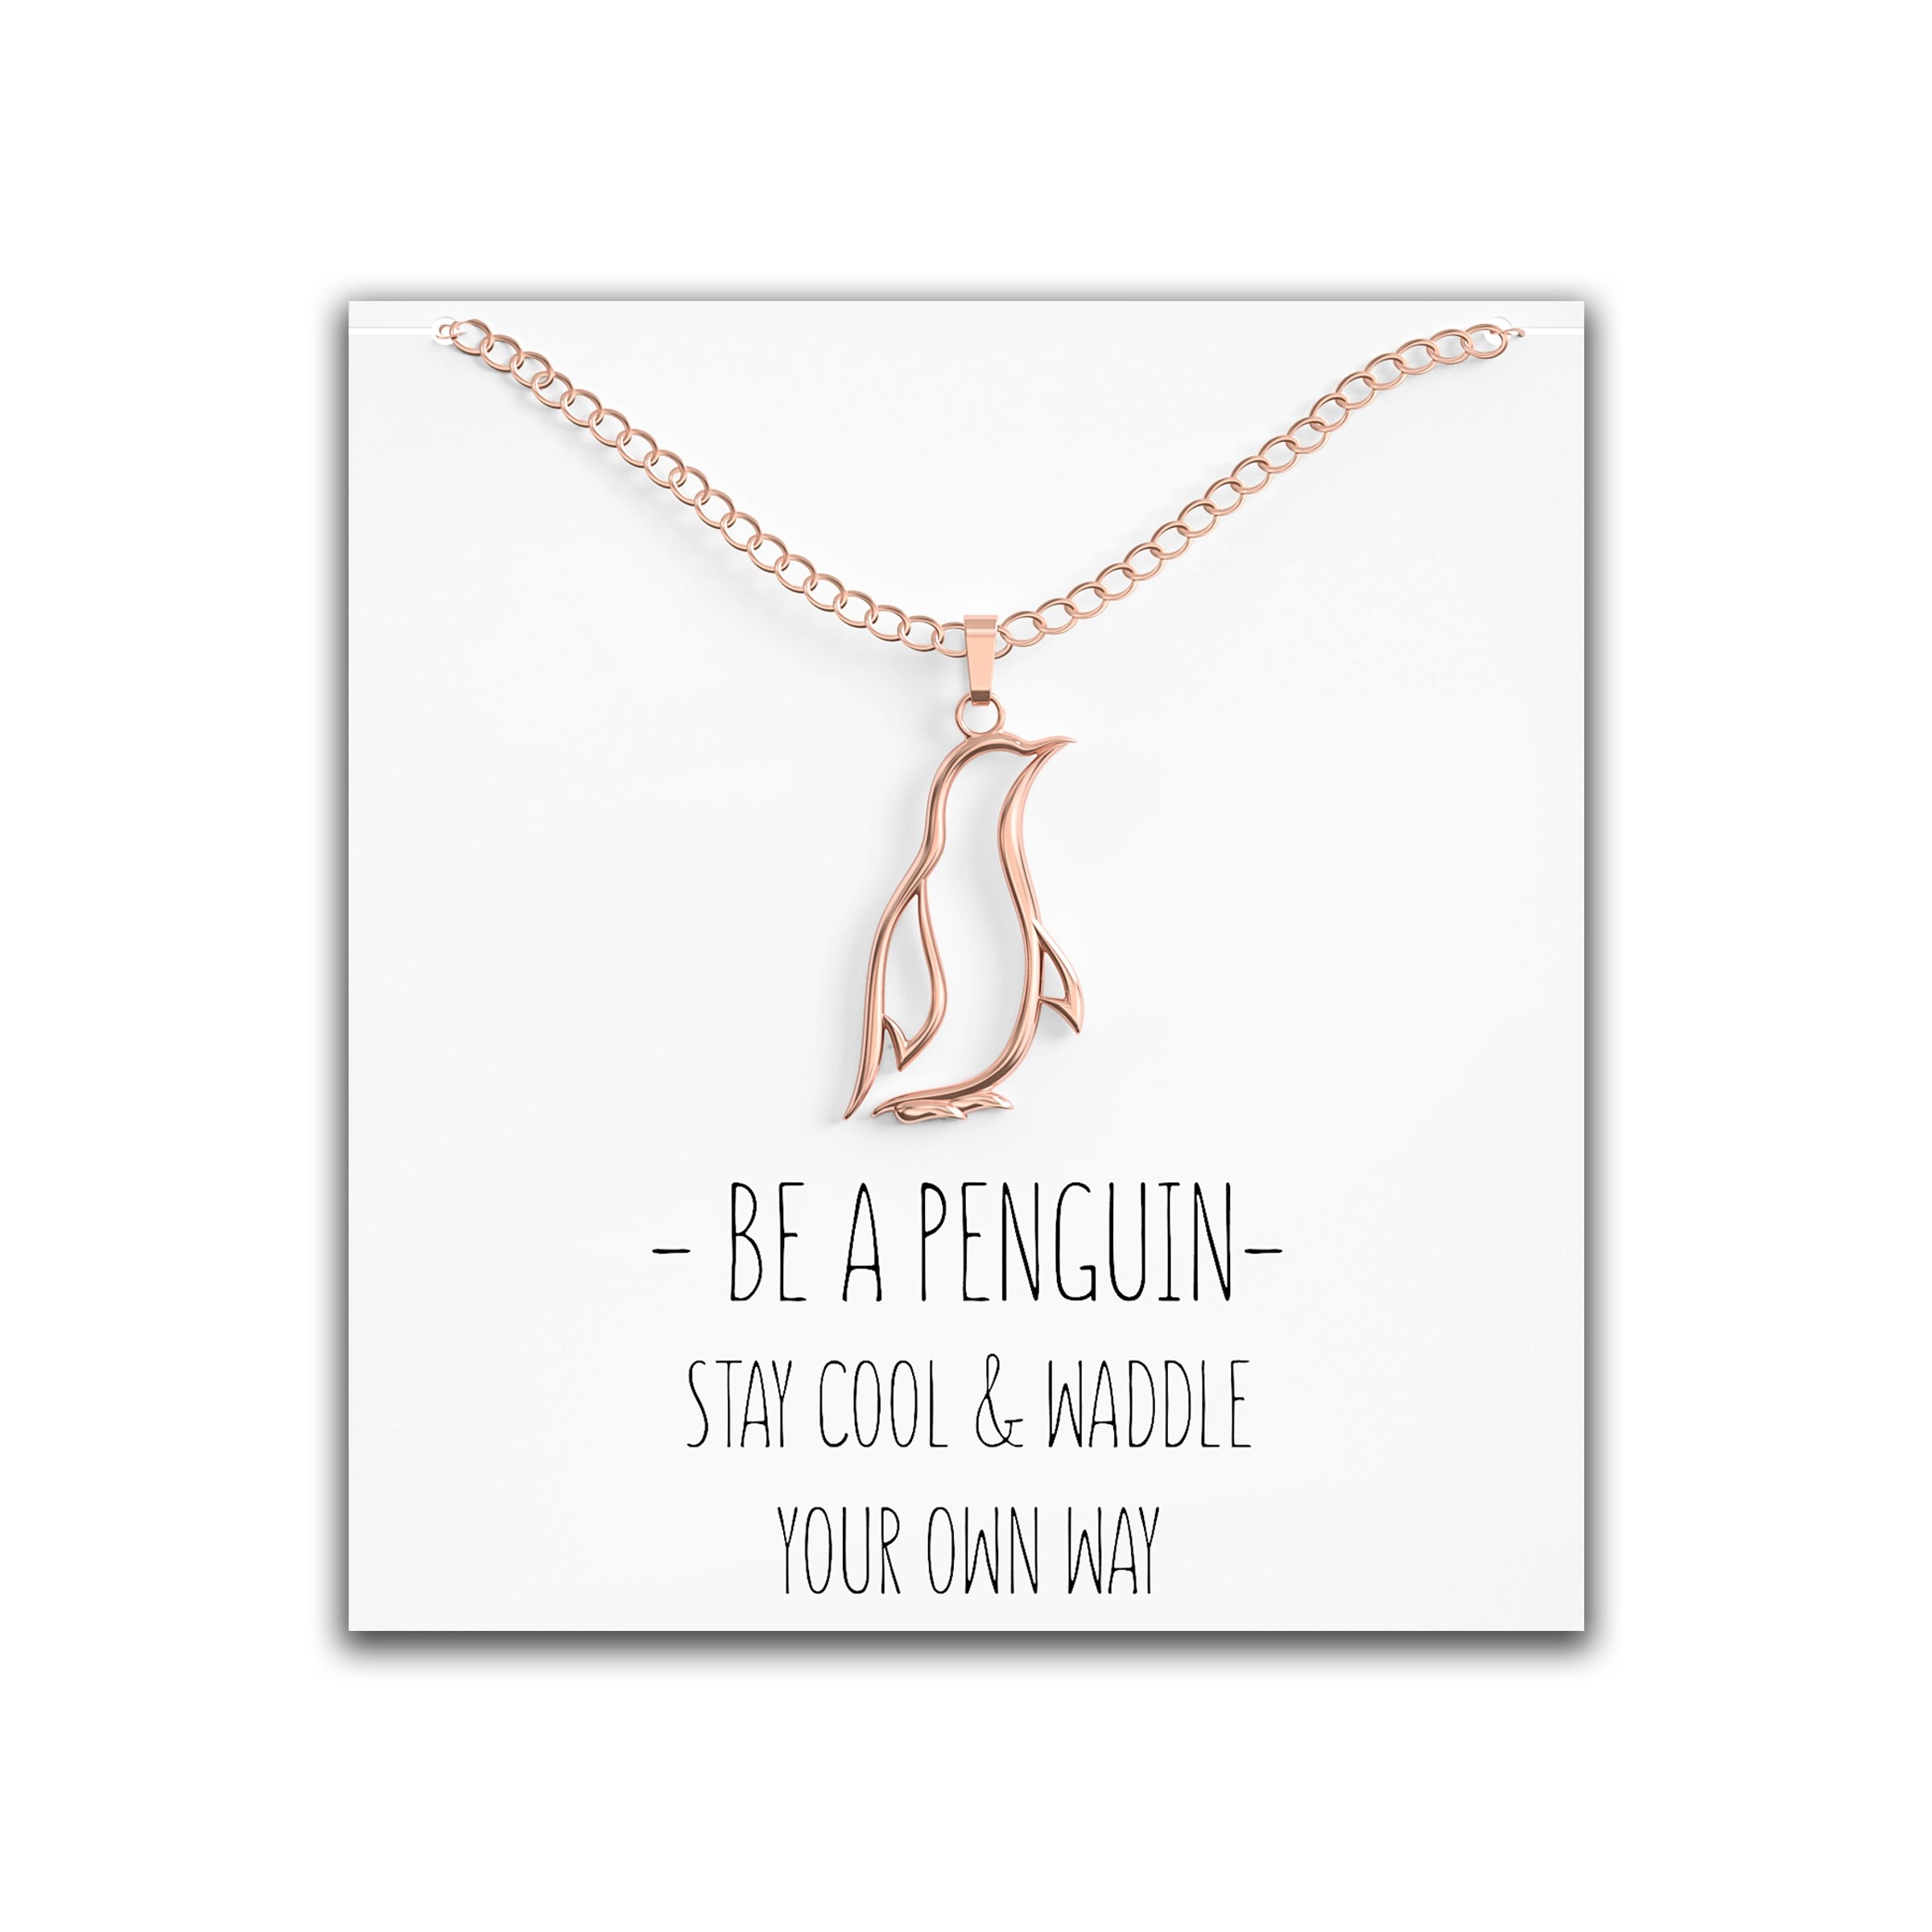 Penguin Necklace Gift – Cute Penguin Pendant – Charm Jewelry For Women, Girls & Kids – With Message Card Rose Gold – Happy Kisses